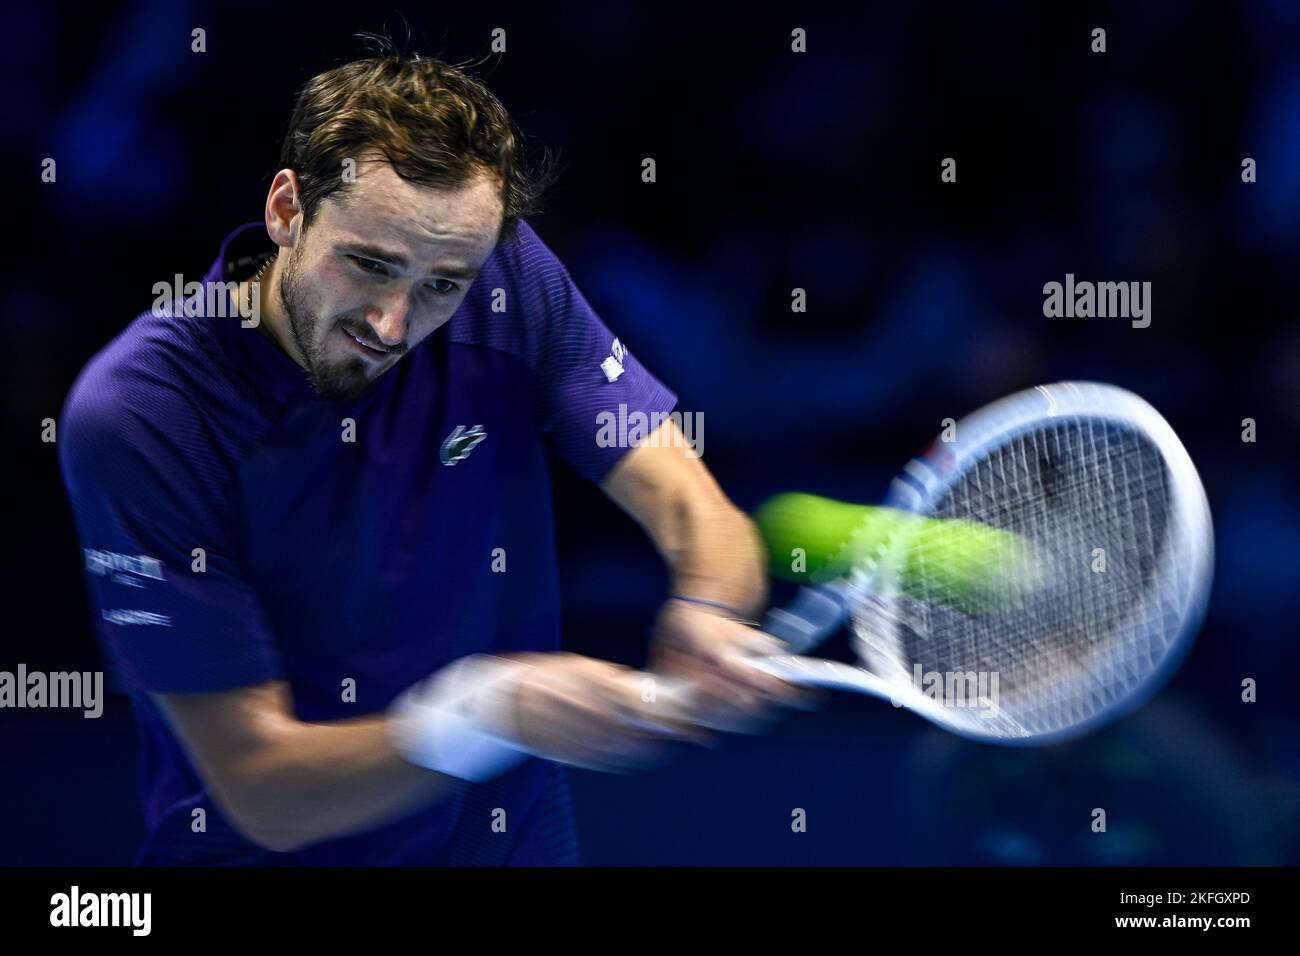 Turin, Italy. 18 November 2022. Daniil Medvedev of Russia plays a backhand shot during his round robin match against Novak Djokovic of Serbia during day six of the Nitto ATP Finals. Novak Djokovic won the match 6-3, 6-7(5), 7-6(2). Credit: Nicolò Campo/Alamy Live News Stock Photo